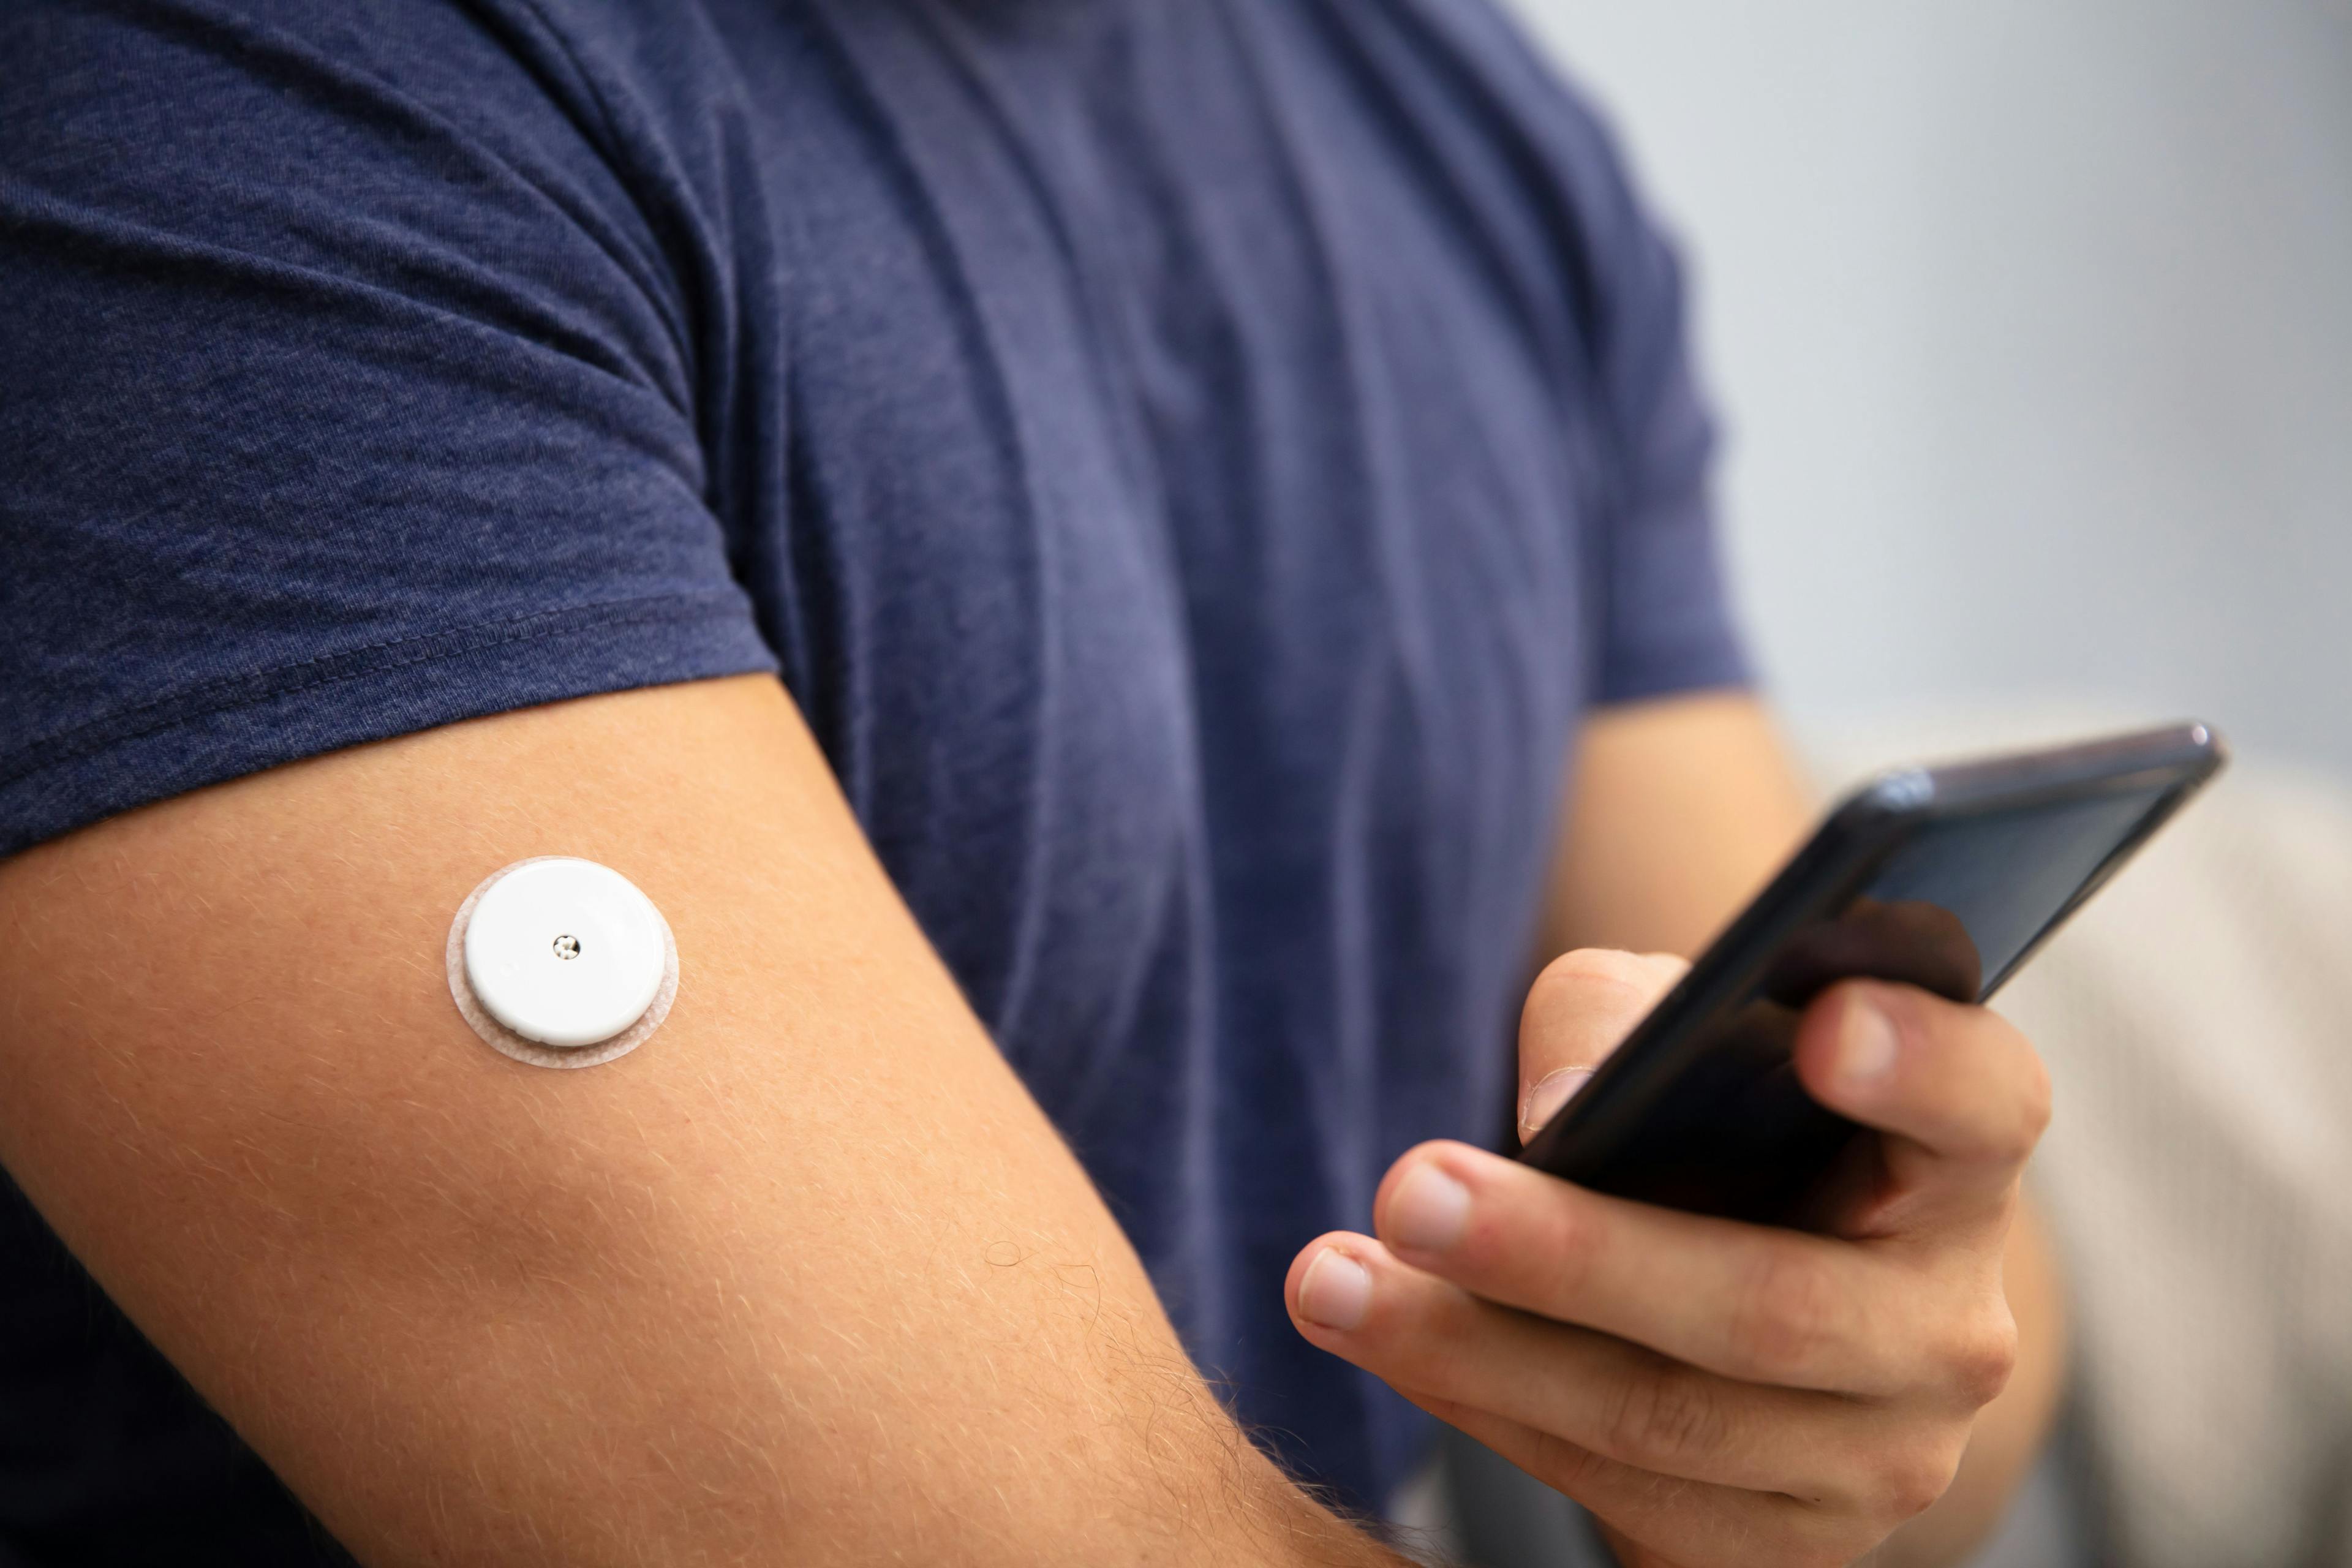 CGM Initiation in Emergency Departments Could Benefit Difficult-to-Reach Patients With Diabetes